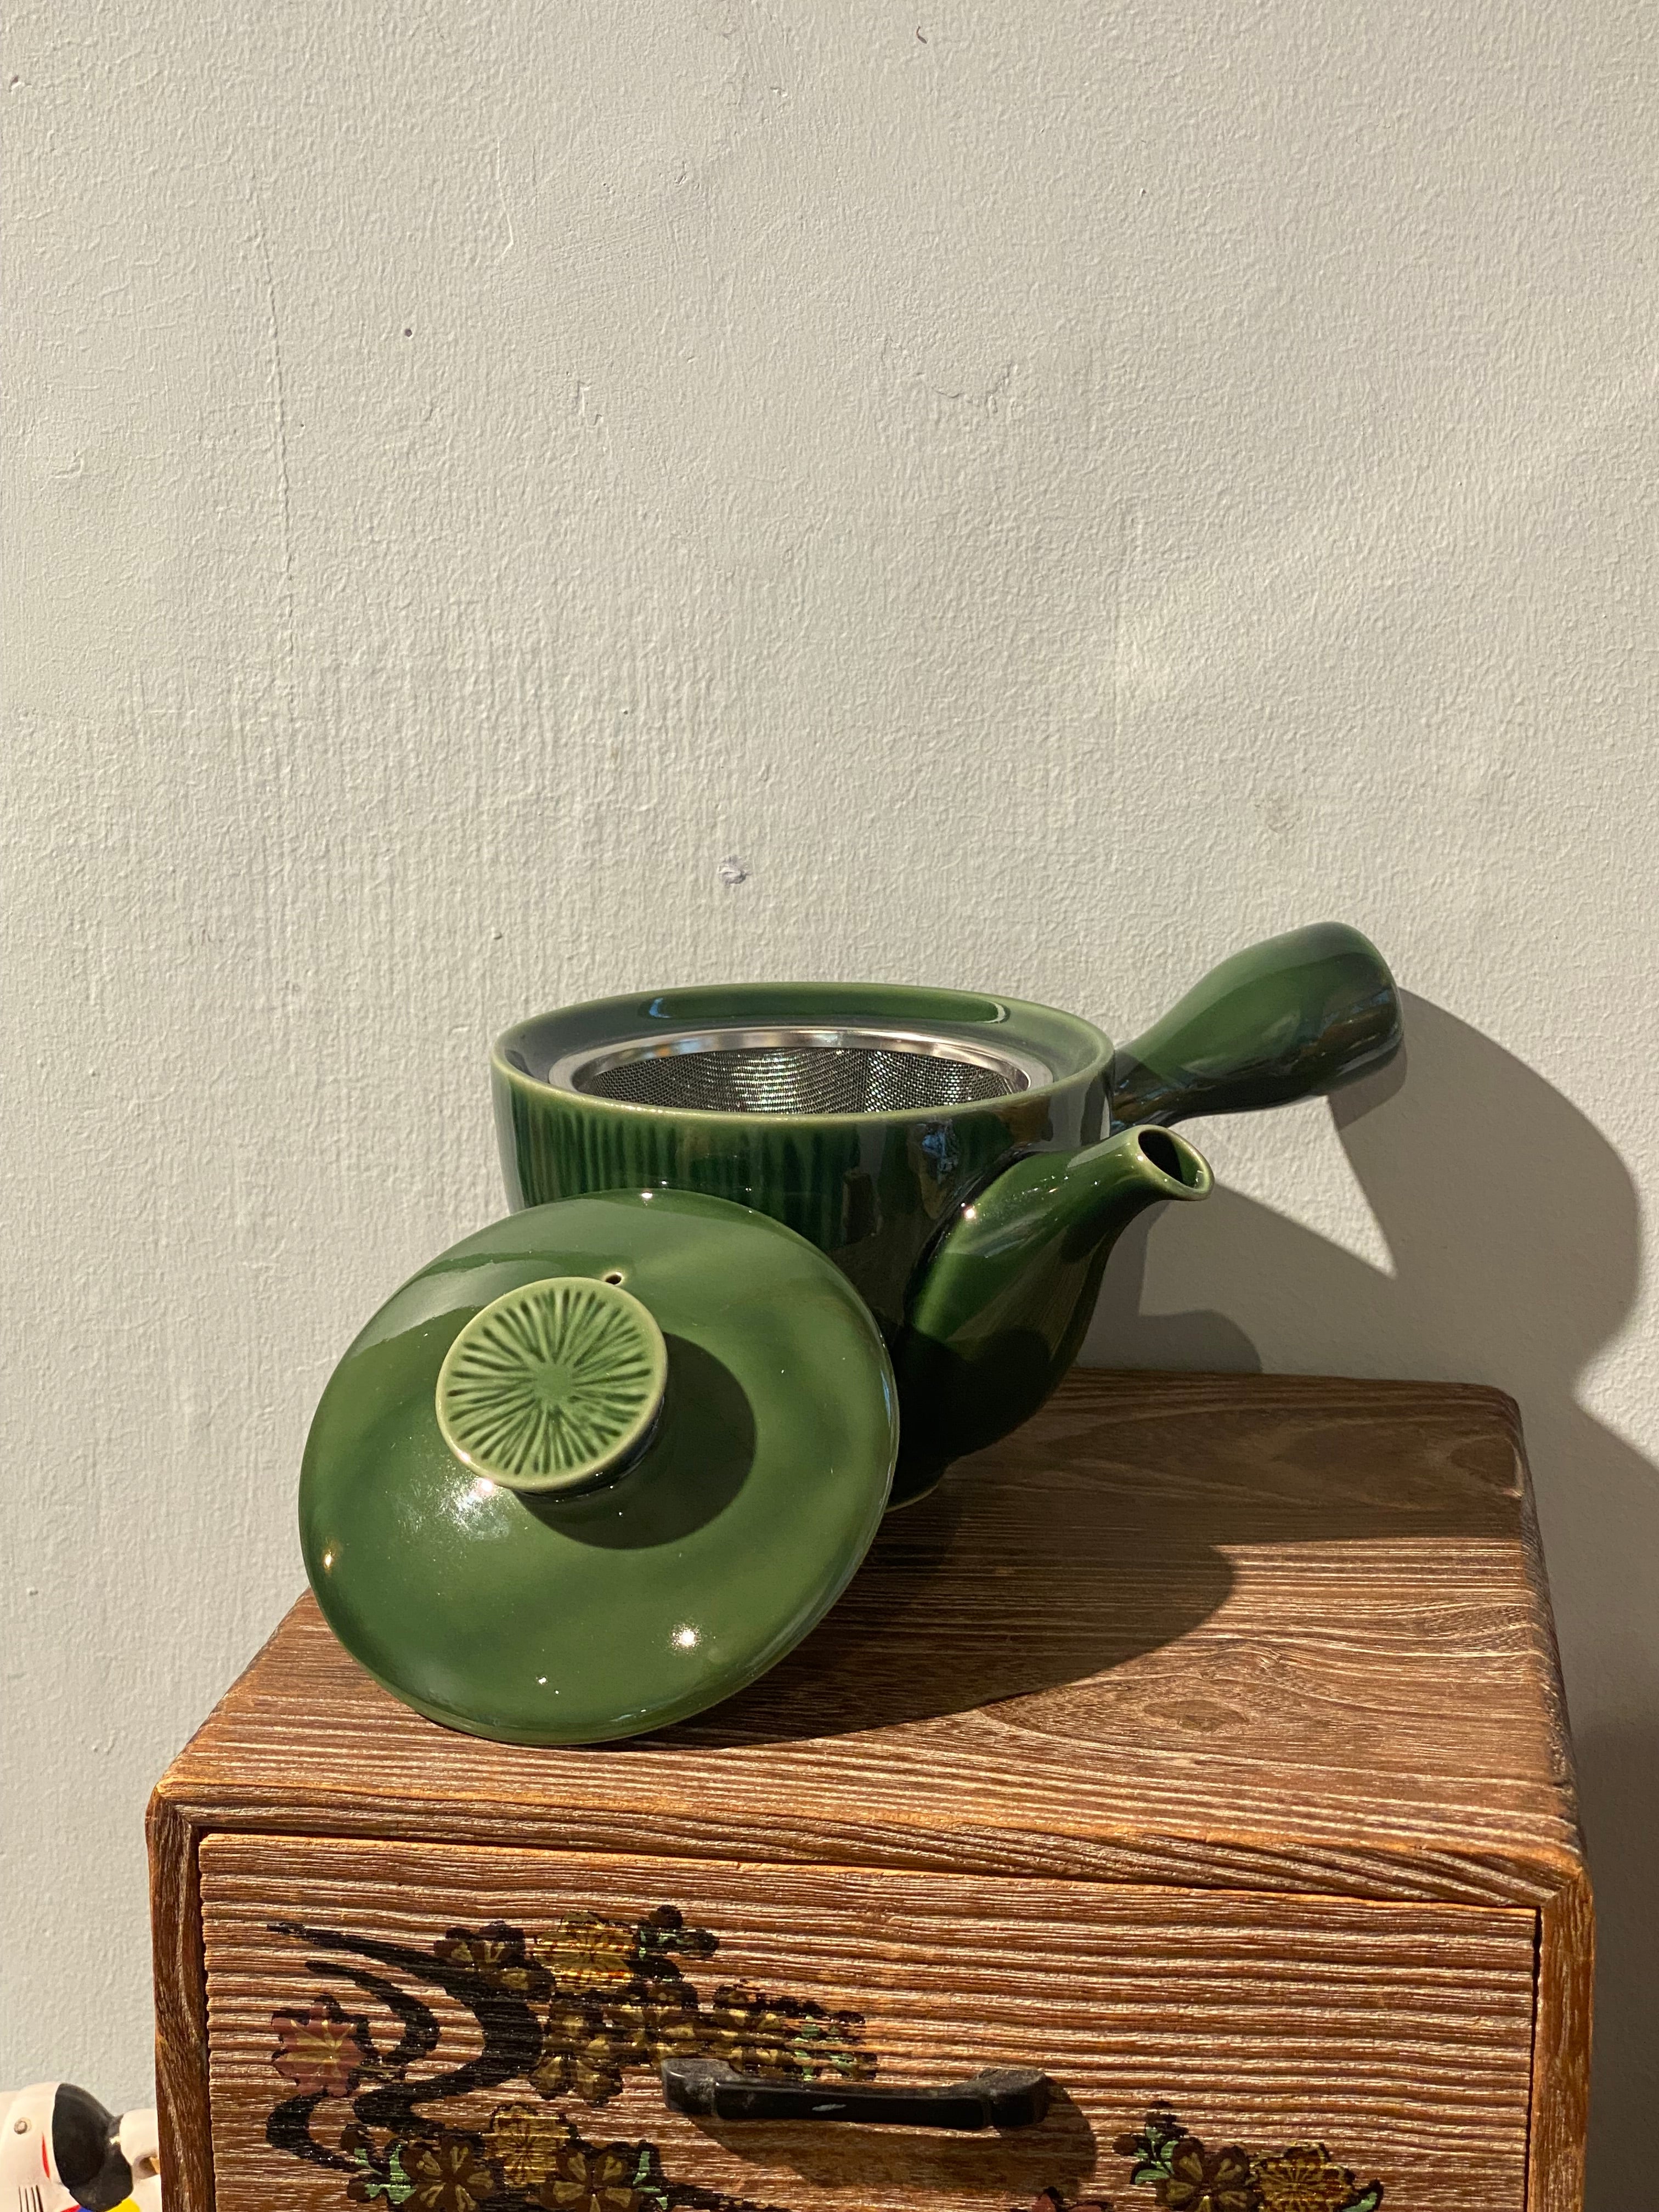 Glossy green teapot with handle